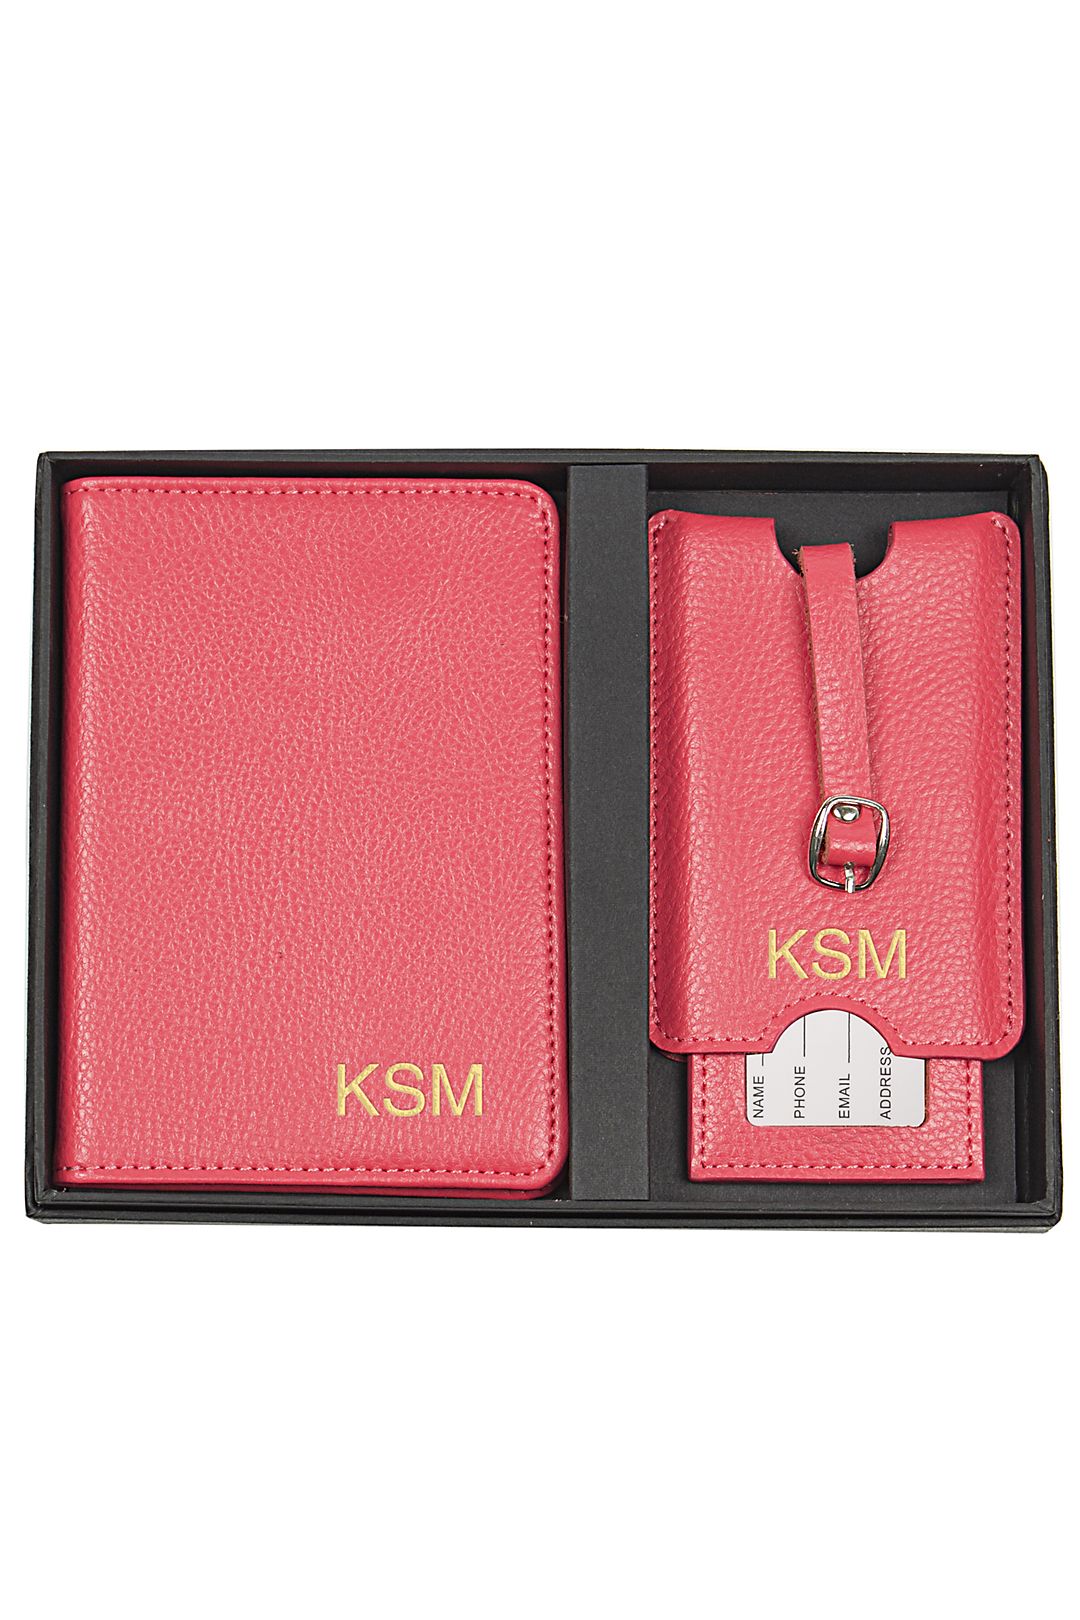 Buy Monogram Passport Cover and Luggage Tagleather Luggage Tags Online in  India 